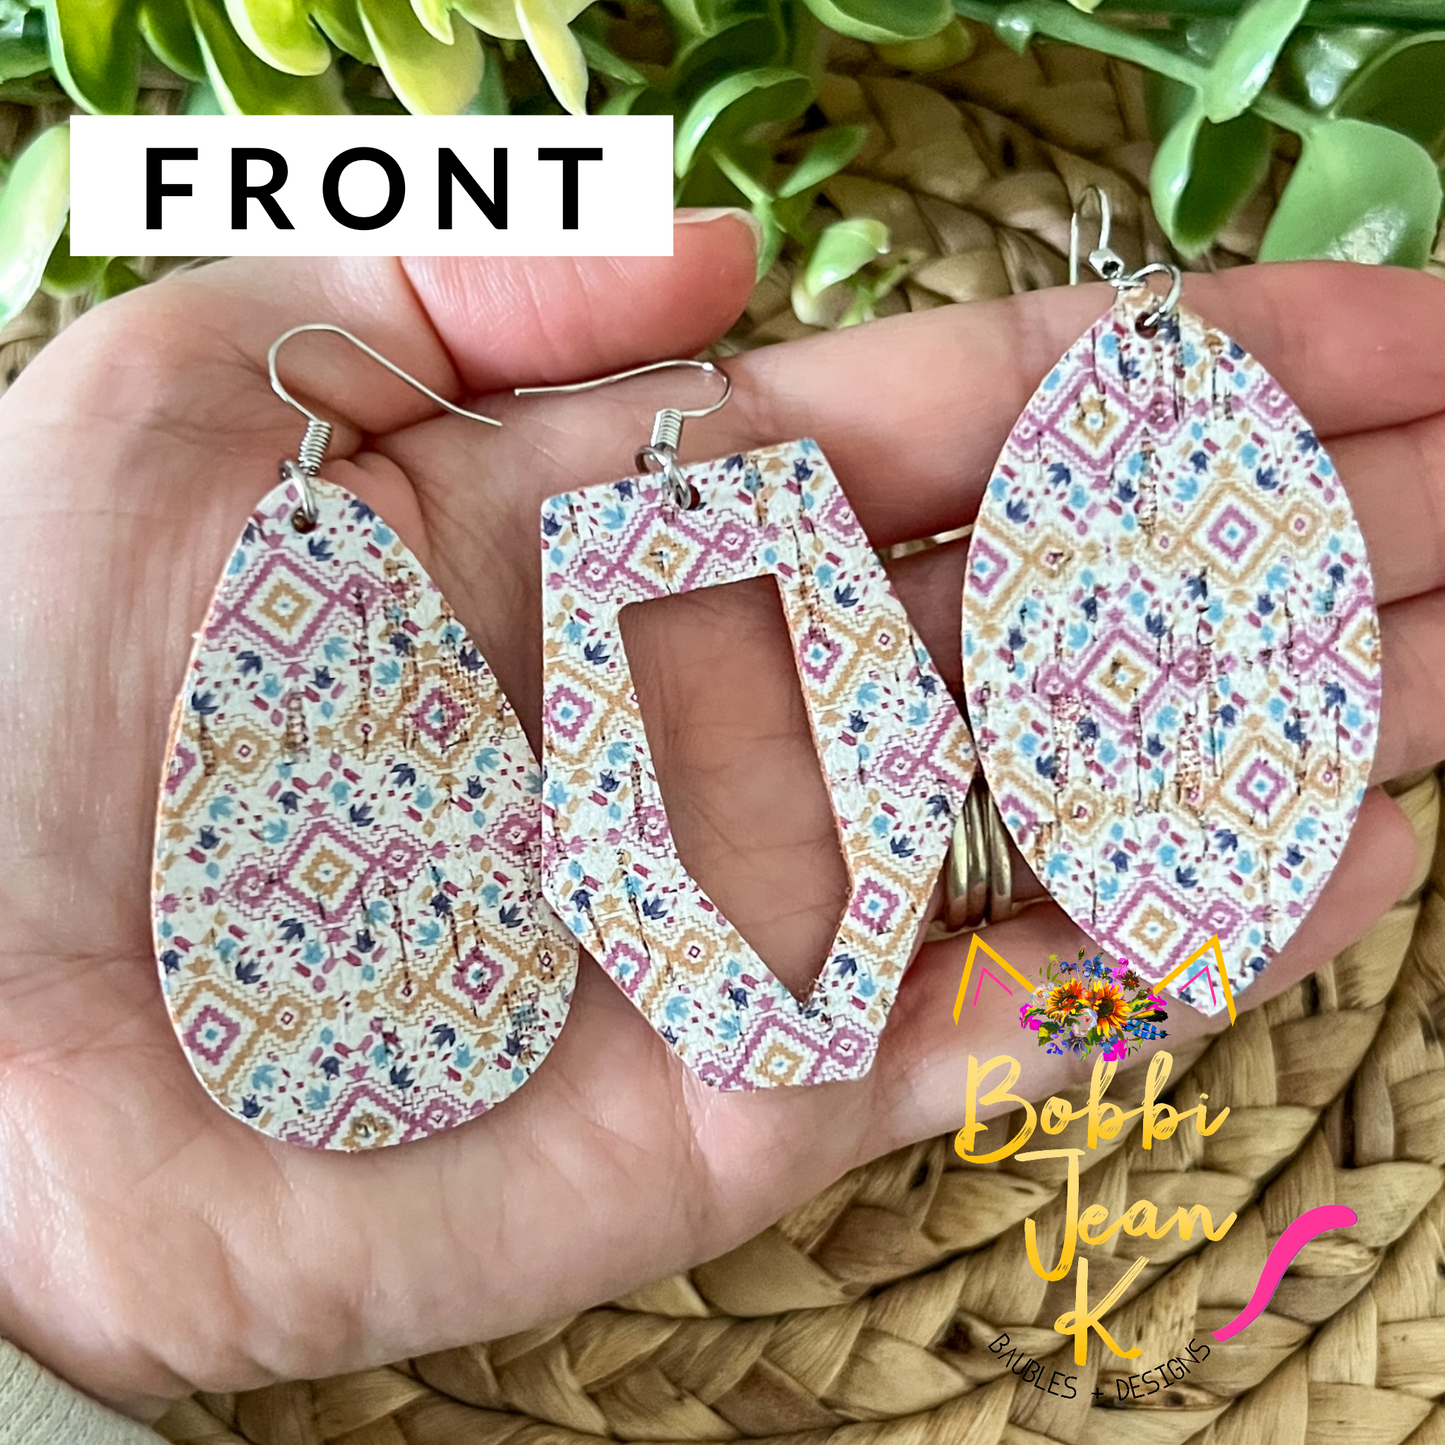 Diamond Multi-Colored Aztec Cork on Leather Earrings: Choose From 3 Styles - LAST CHANCE